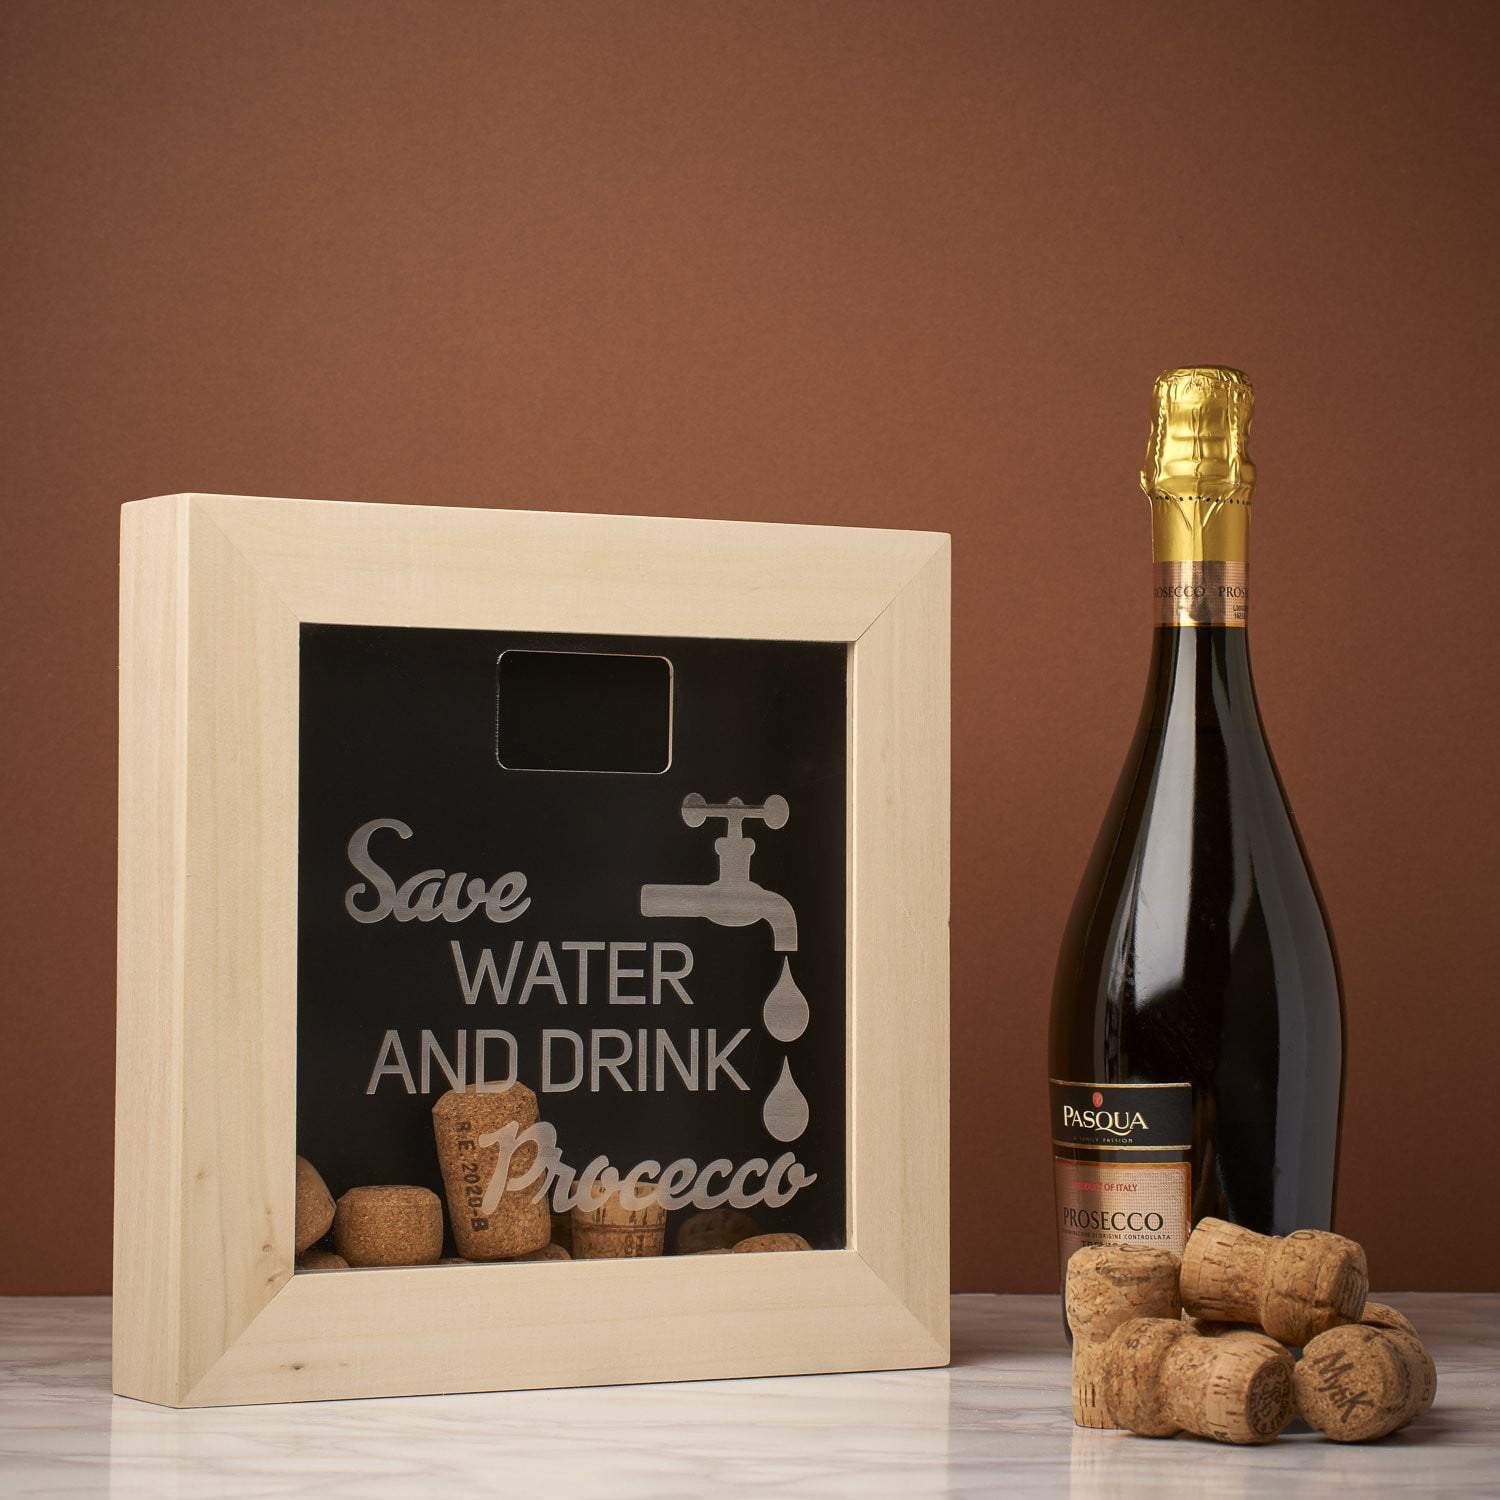 Memory Box Frame - Save Water And Drink ... Memory Box Frame